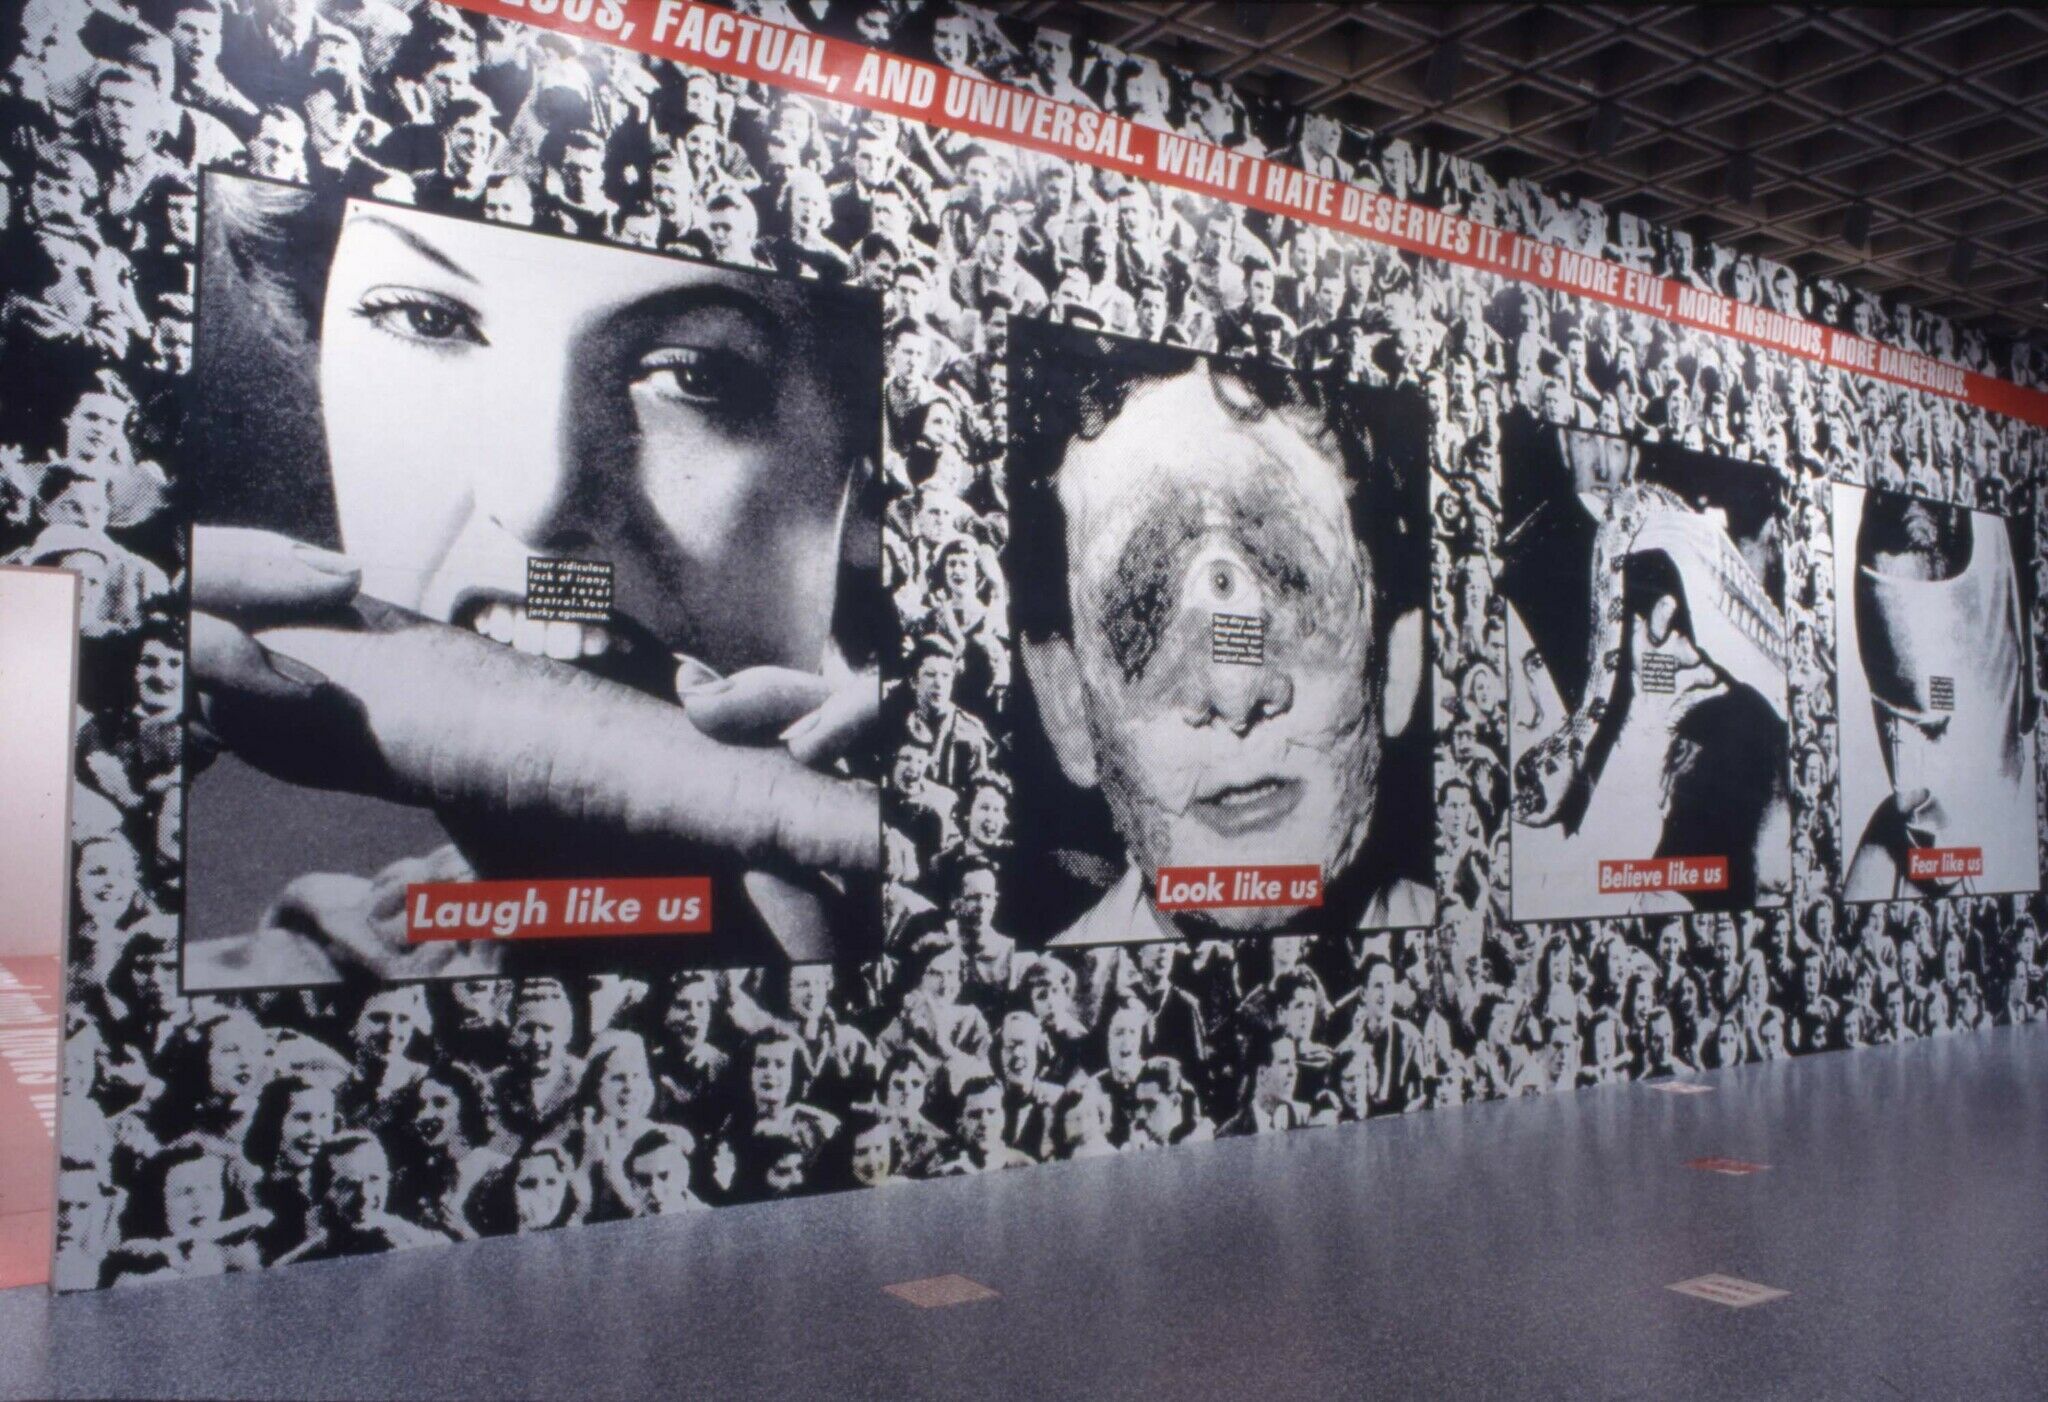 A wall in a gallery covered with a black and white photograph of a crowd, along with other photos displayed on the wall.